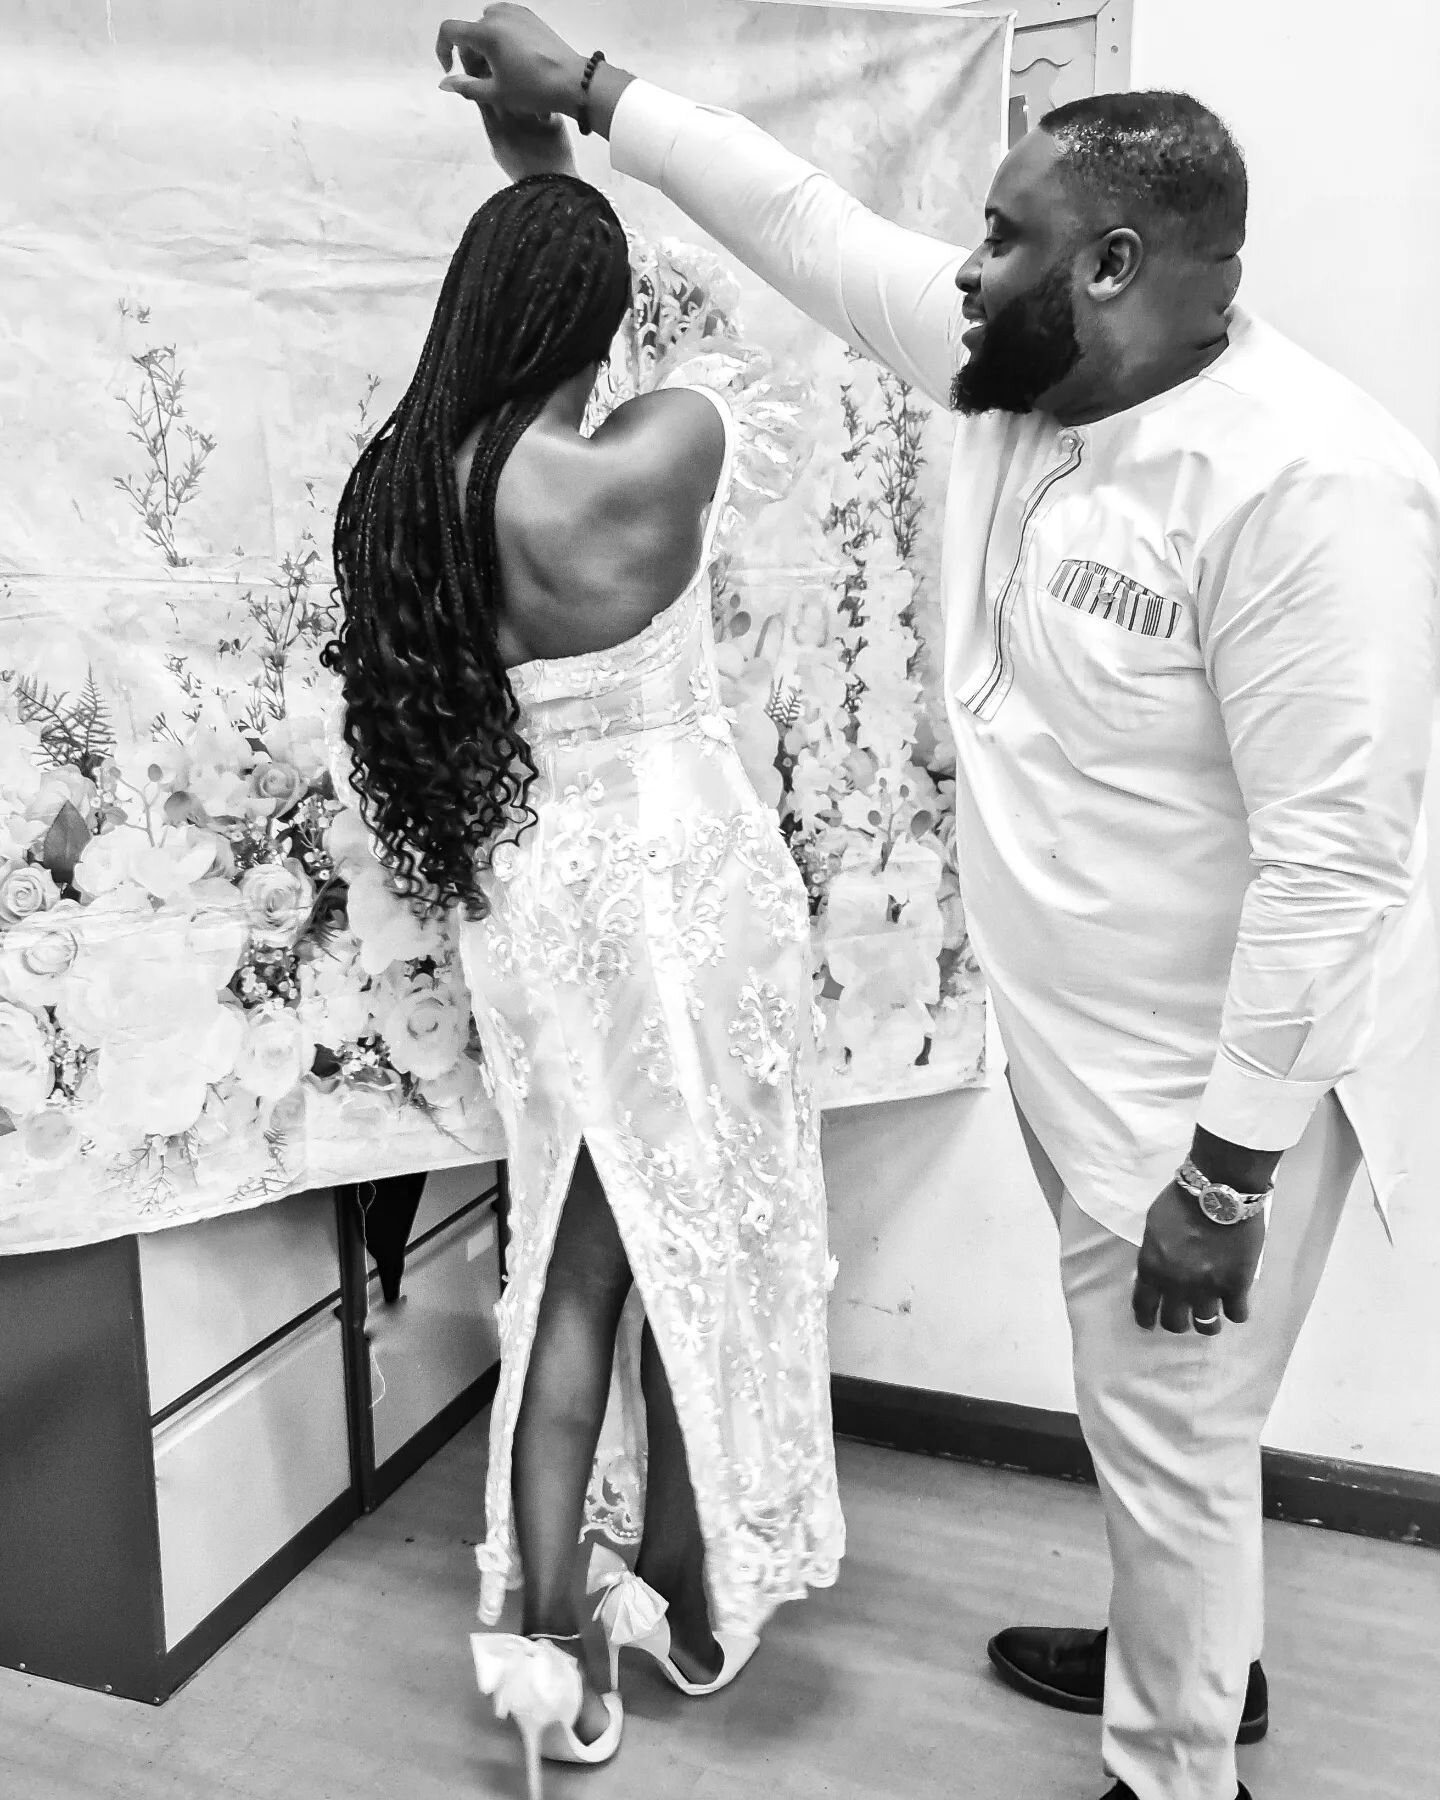 6 on the 6th 🎉
Let's keep on loving like no one's watching @kings_art 🖤

Today was a dream come true dedicating our son to the Lord and celebrating our 6th year wedding anniversary with our dear loved ones. God has been truly faithful. May He conti